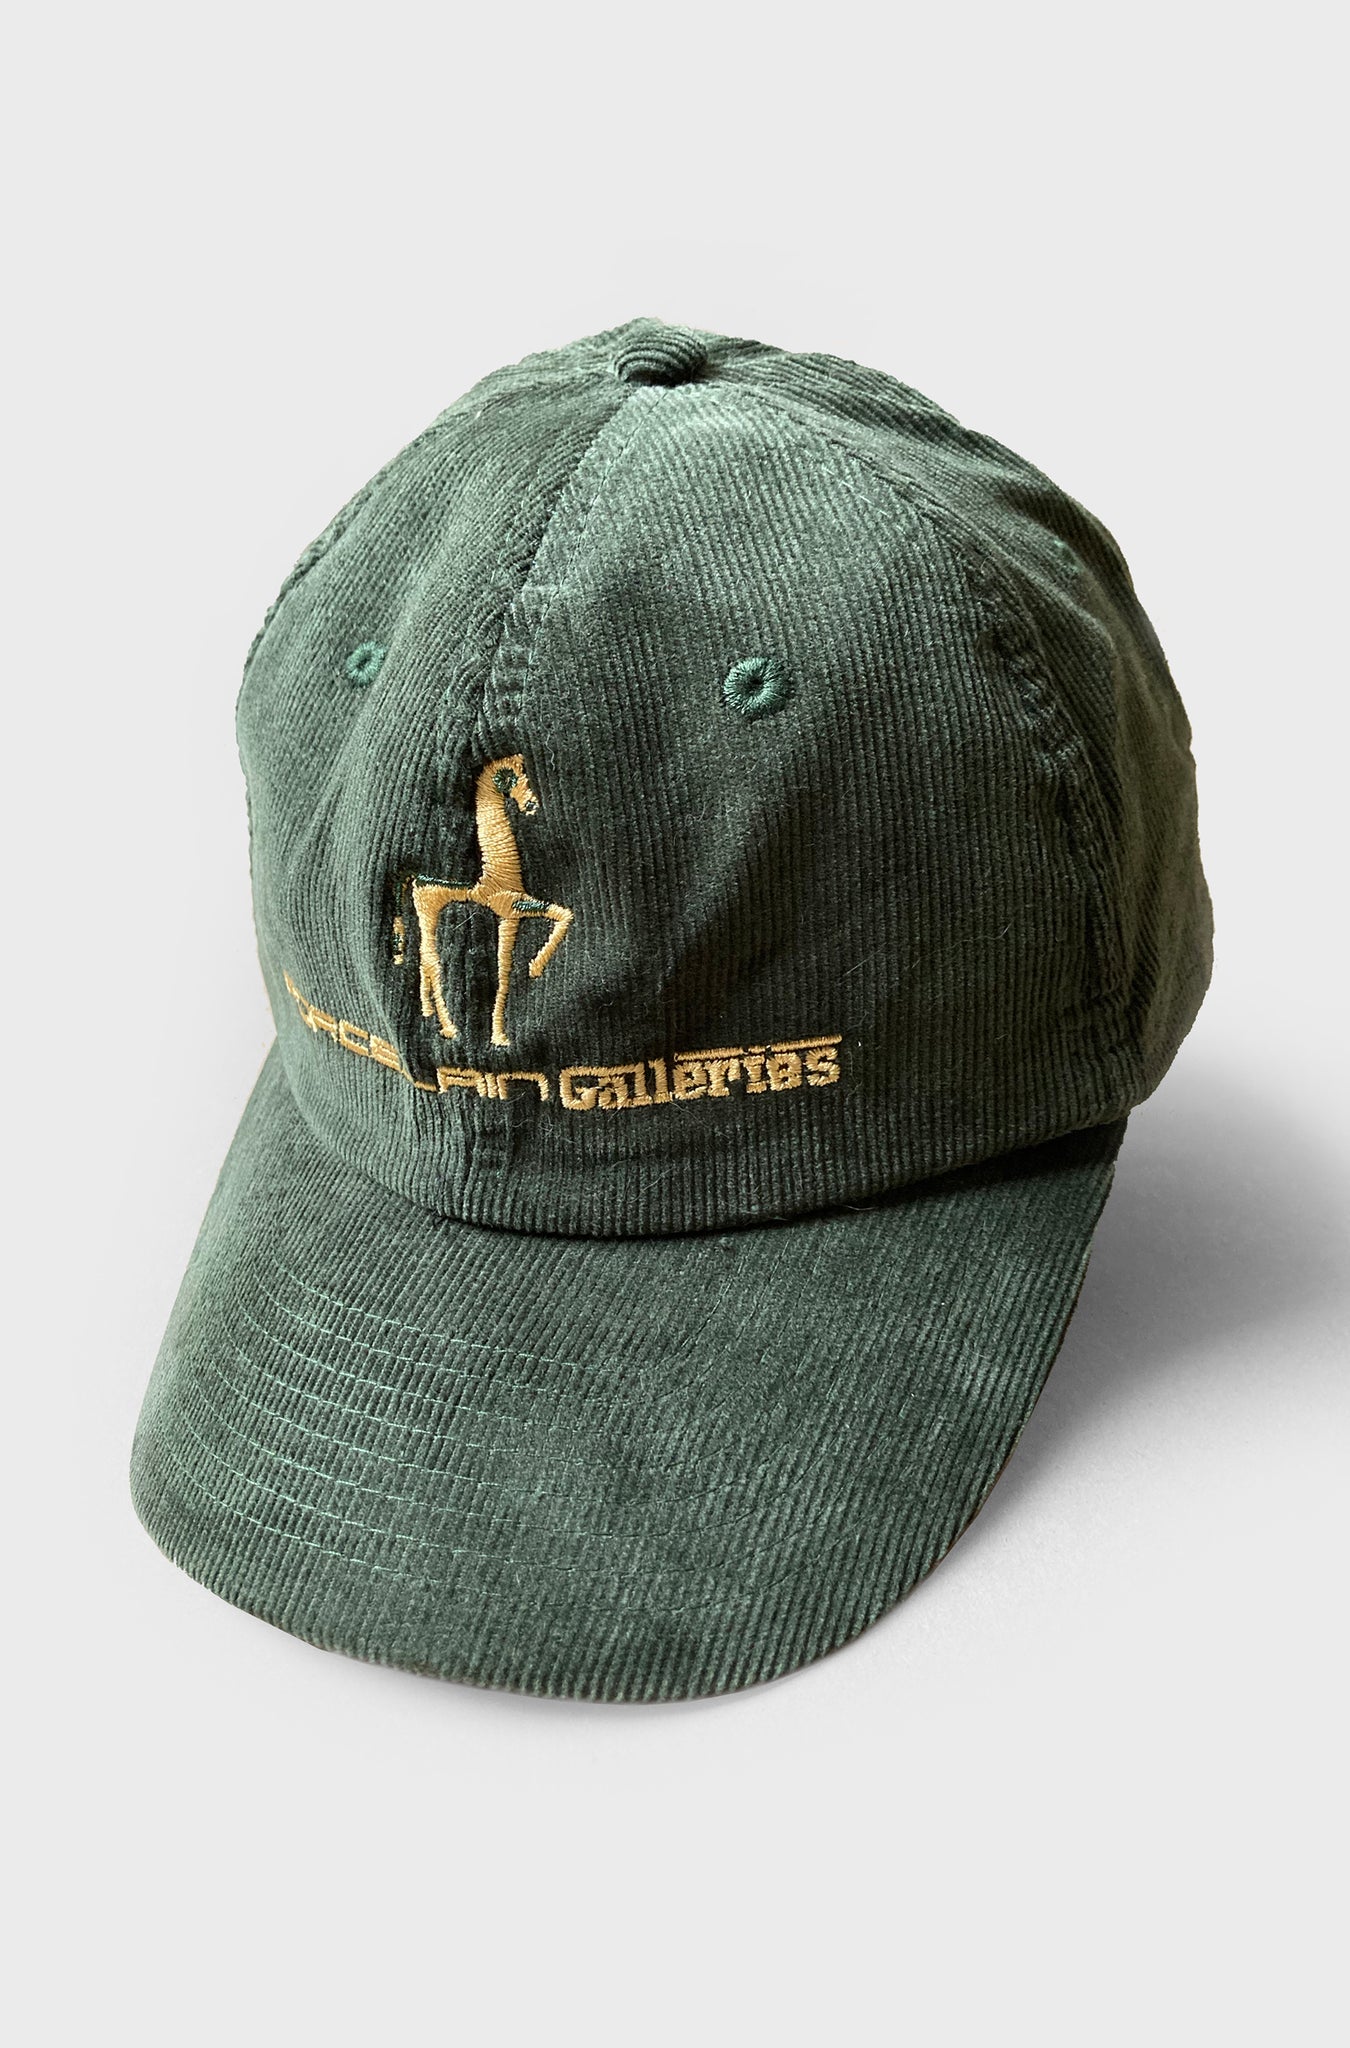 Porcelain Galleries Embroidered peaked cap. Green Corduroy